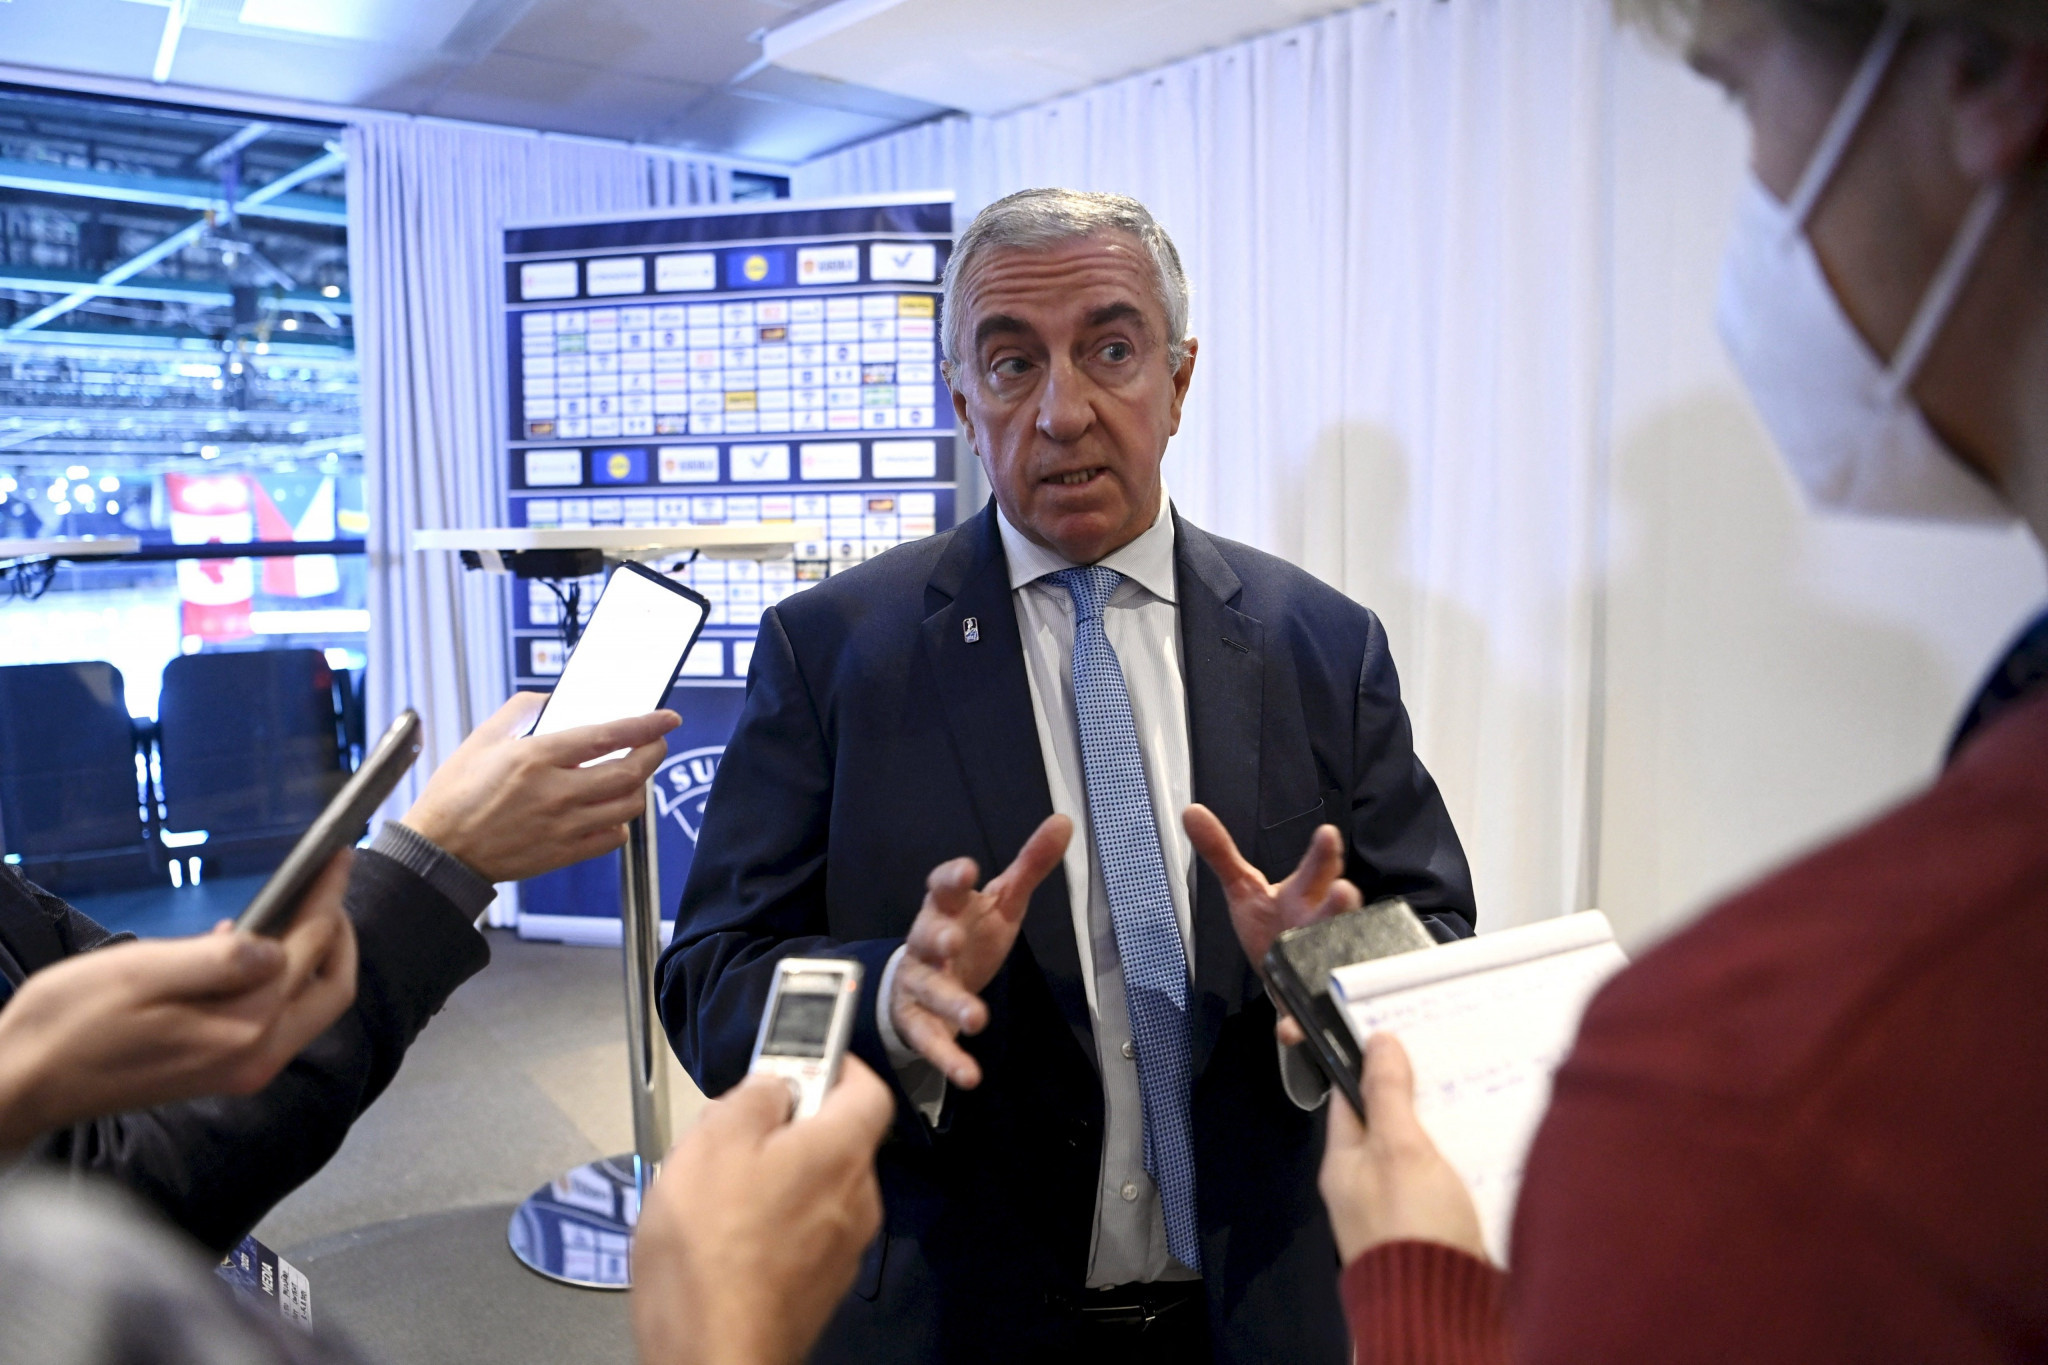 International Ice Hockey Federation President Luc Tardif has prevously spoke of his optimism over National Hockey League players competing at the Milan Cortina 2026 Winter Olympics ©Getty Images